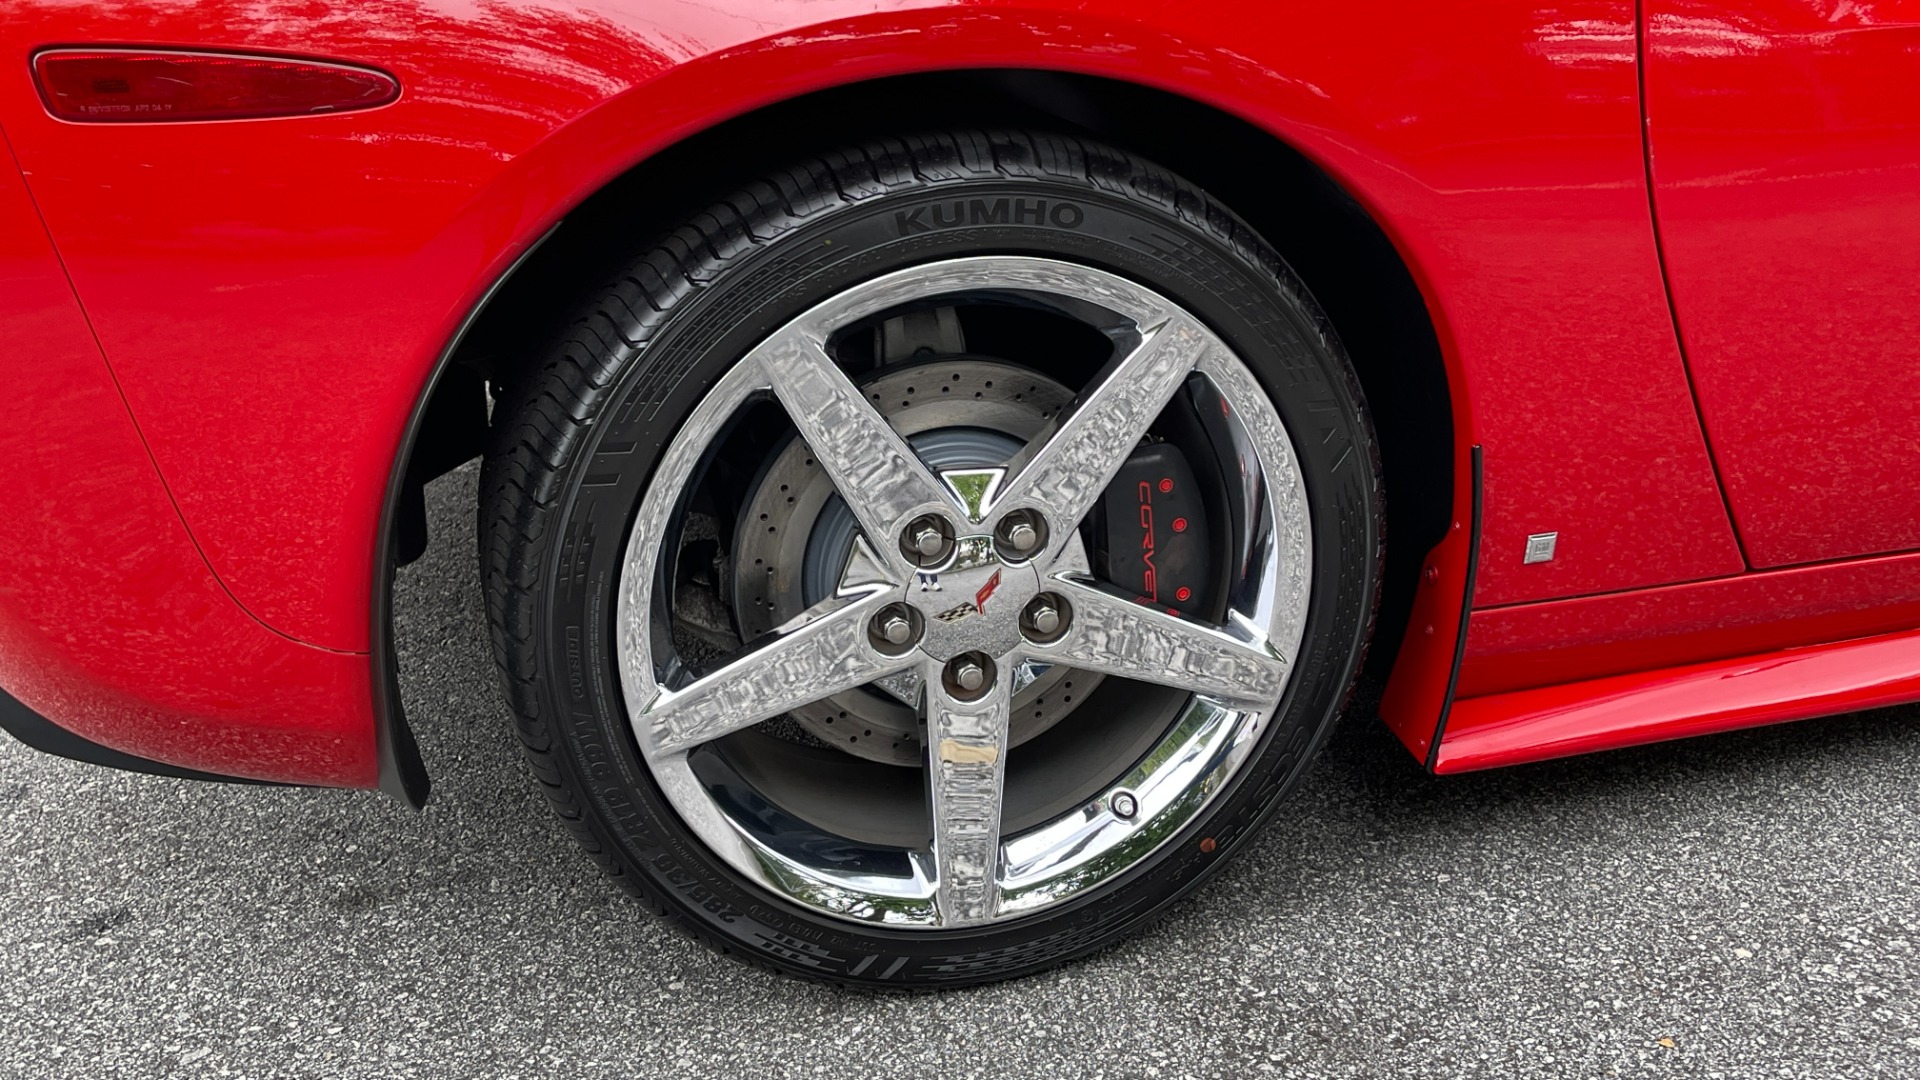 Used 2007 Chevrolet Corvette CONVERTIBLE / CORSA EXHAUST / CHROME WHEELS / LEATHER / AUTOMATIC for sale Sold at Formula Imports in Charlotte NC 28227 47